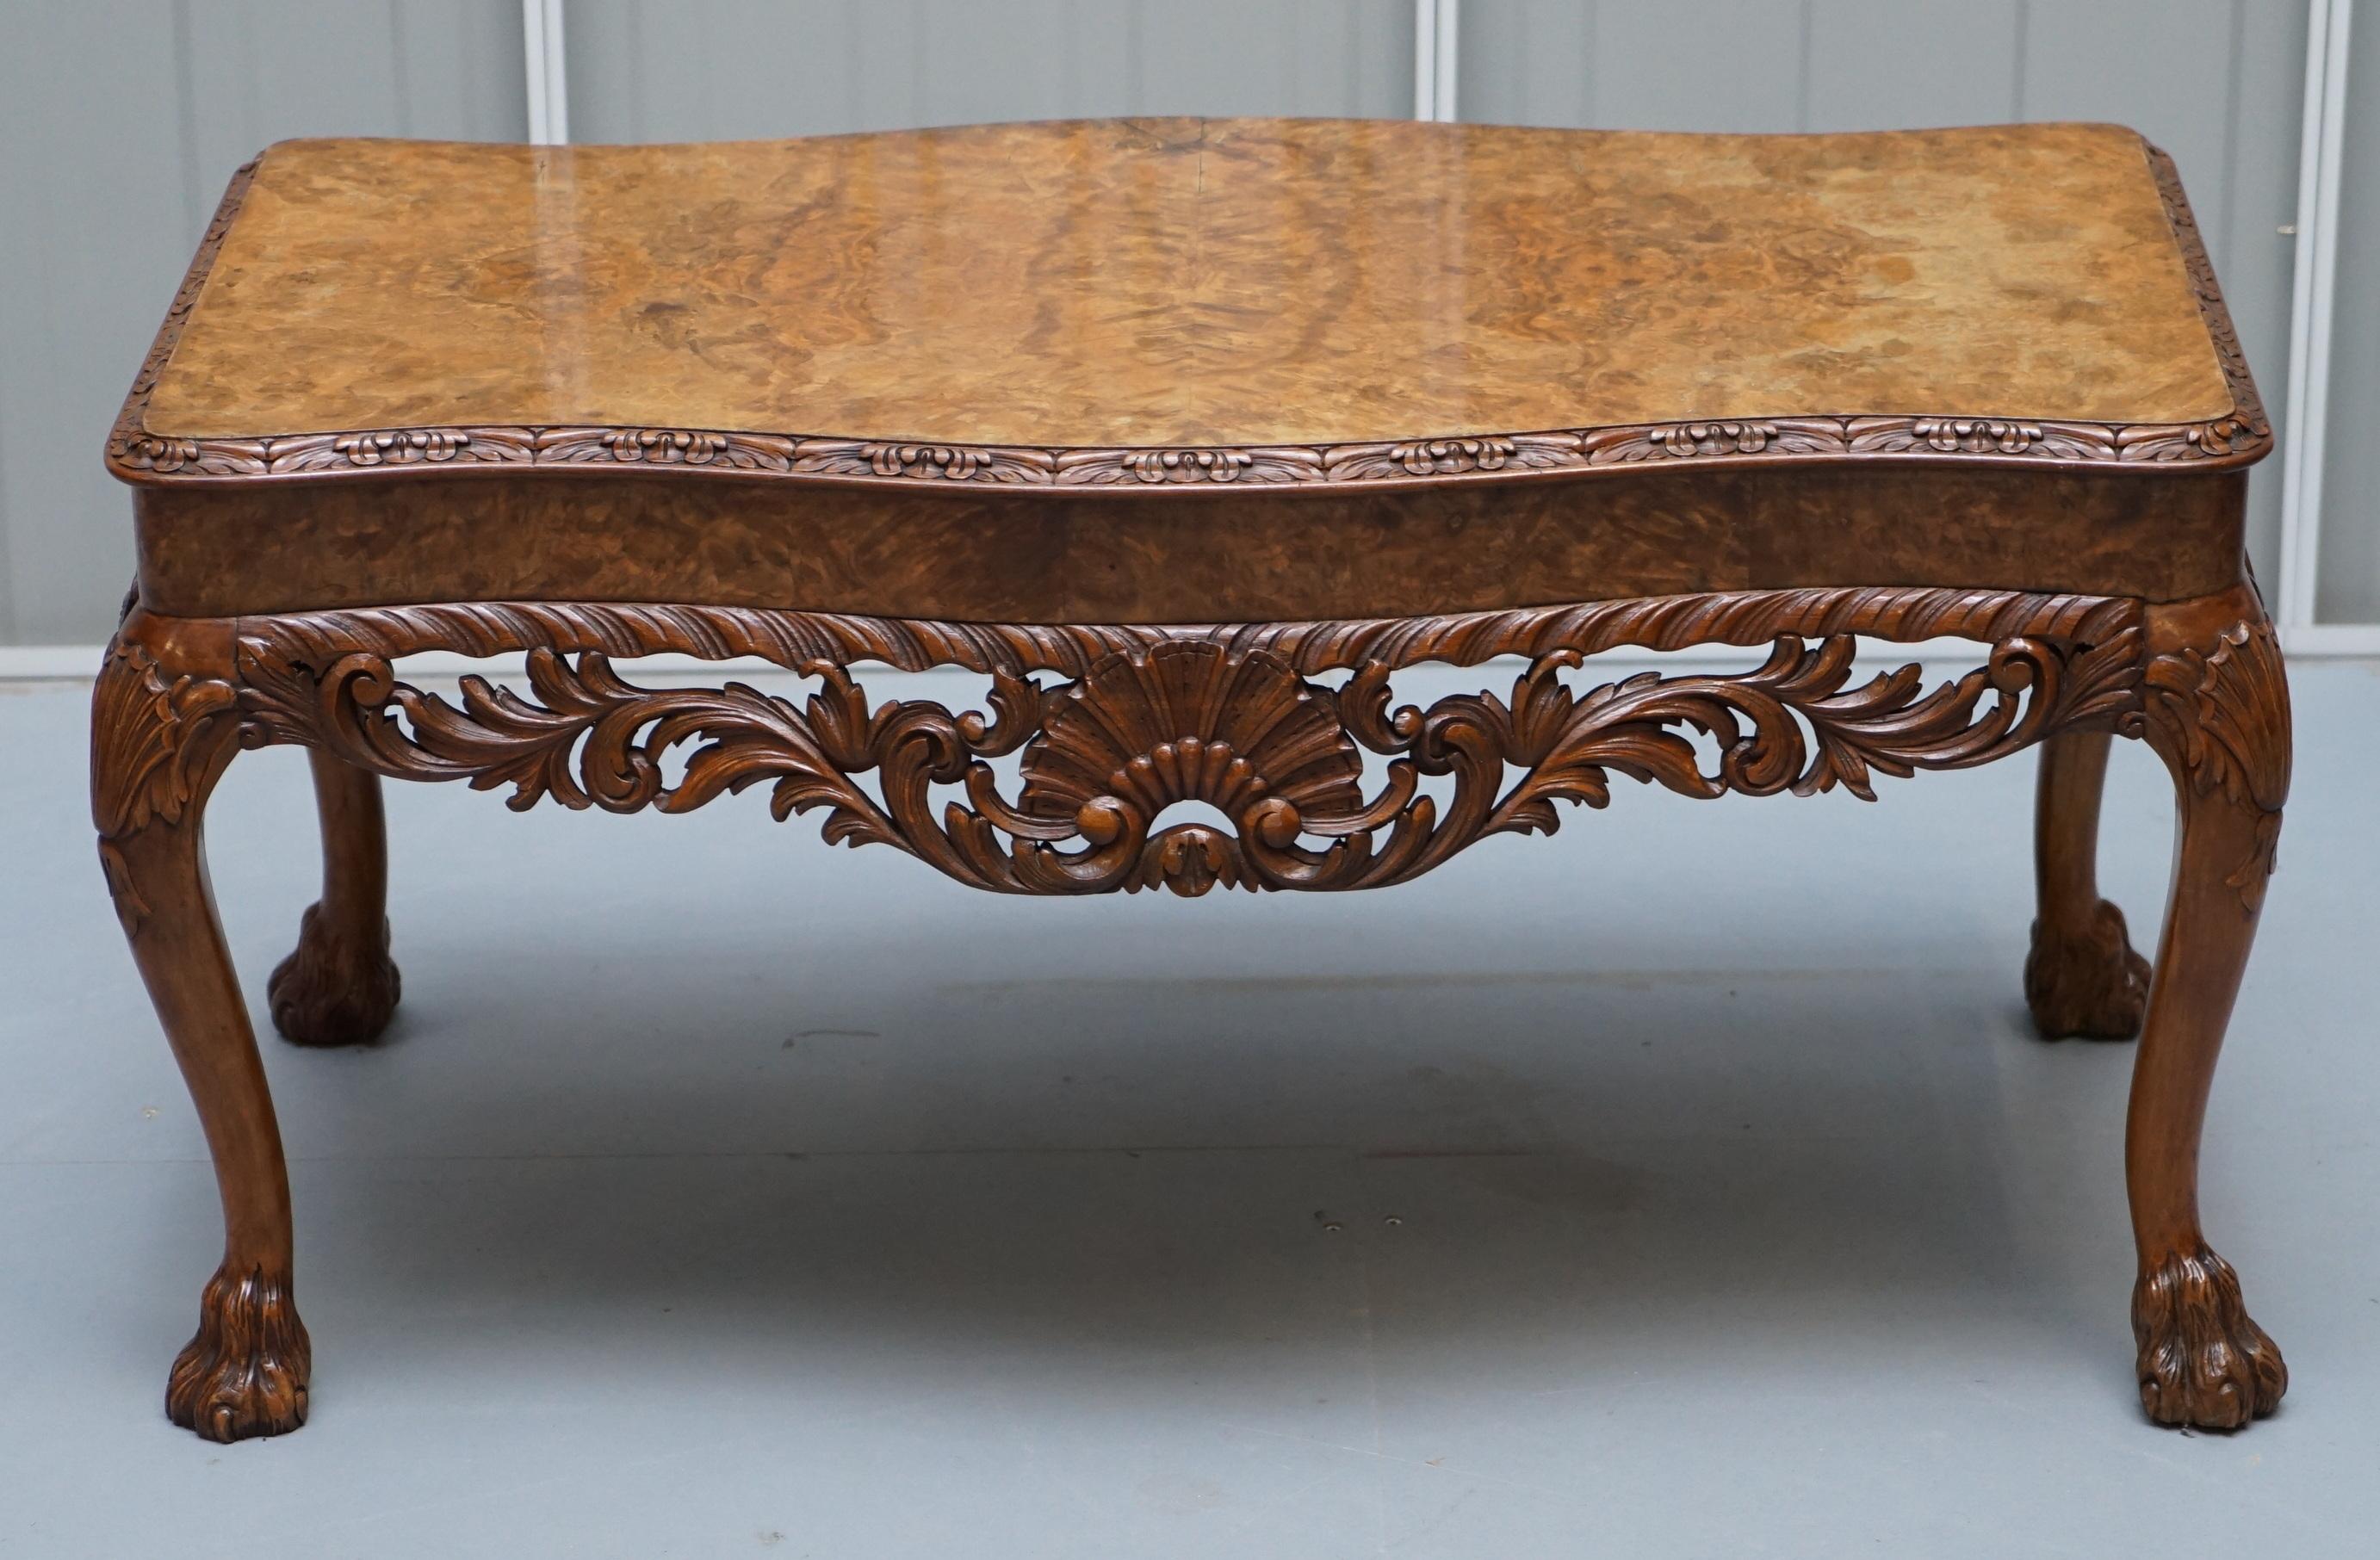 We  delighted to offer for sale this lovely vintage burr walnut coffee table with ornately carved frame and lion hairy paw feet

A very good looking well made and decorative table, the top has been used with a glass cover so its in perfect